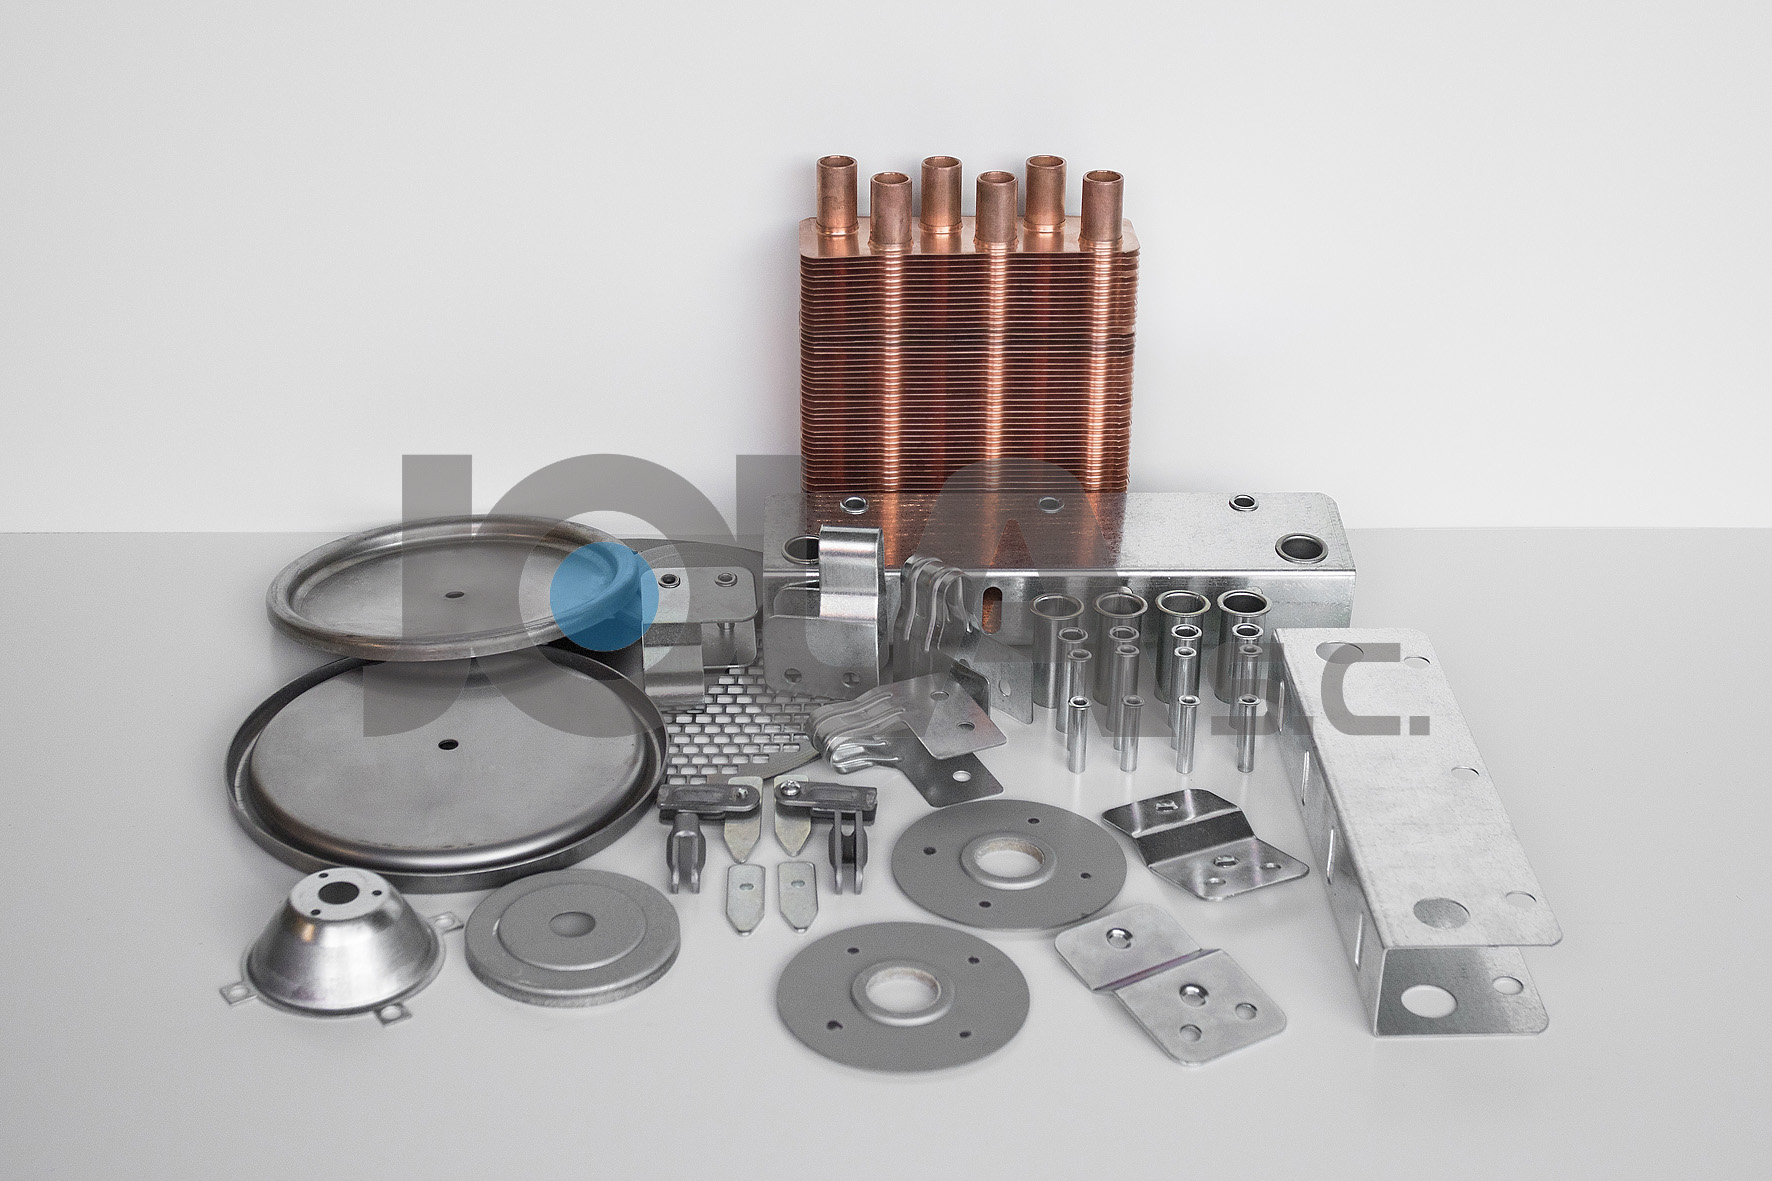 JOLA we produce all kinds of pressed elements that are part of the rollers (idlers) of belt conveyors, we produce bearing housings, seals, elements for idlers.